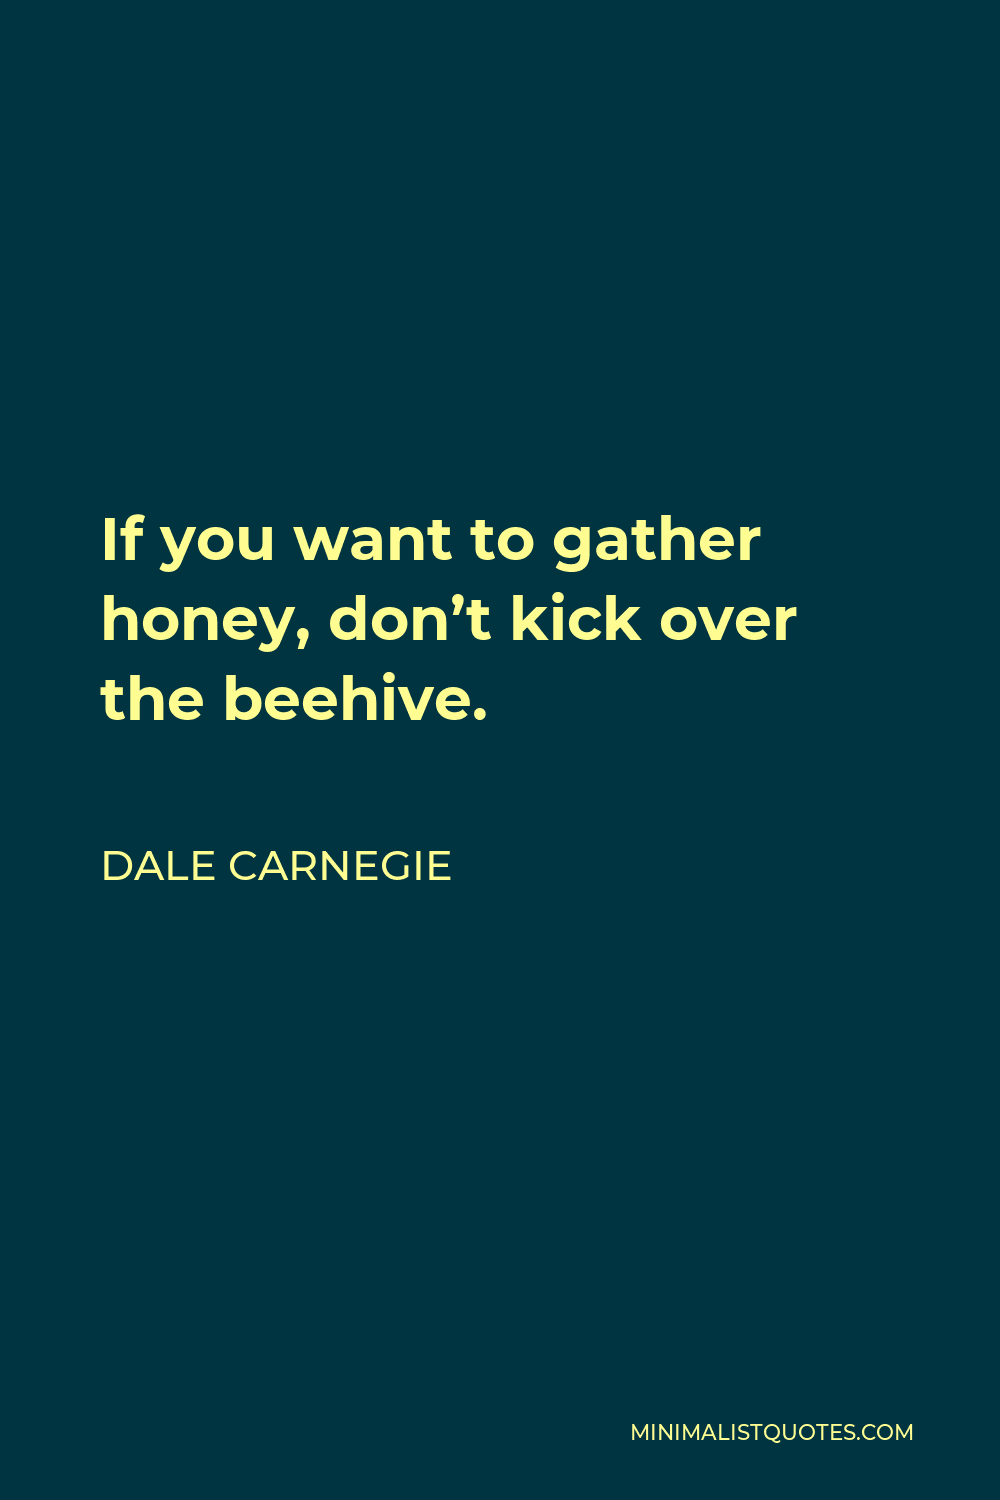 Dale Carnegie Quote - If you want to gather honey, don’t kick over the beehive.